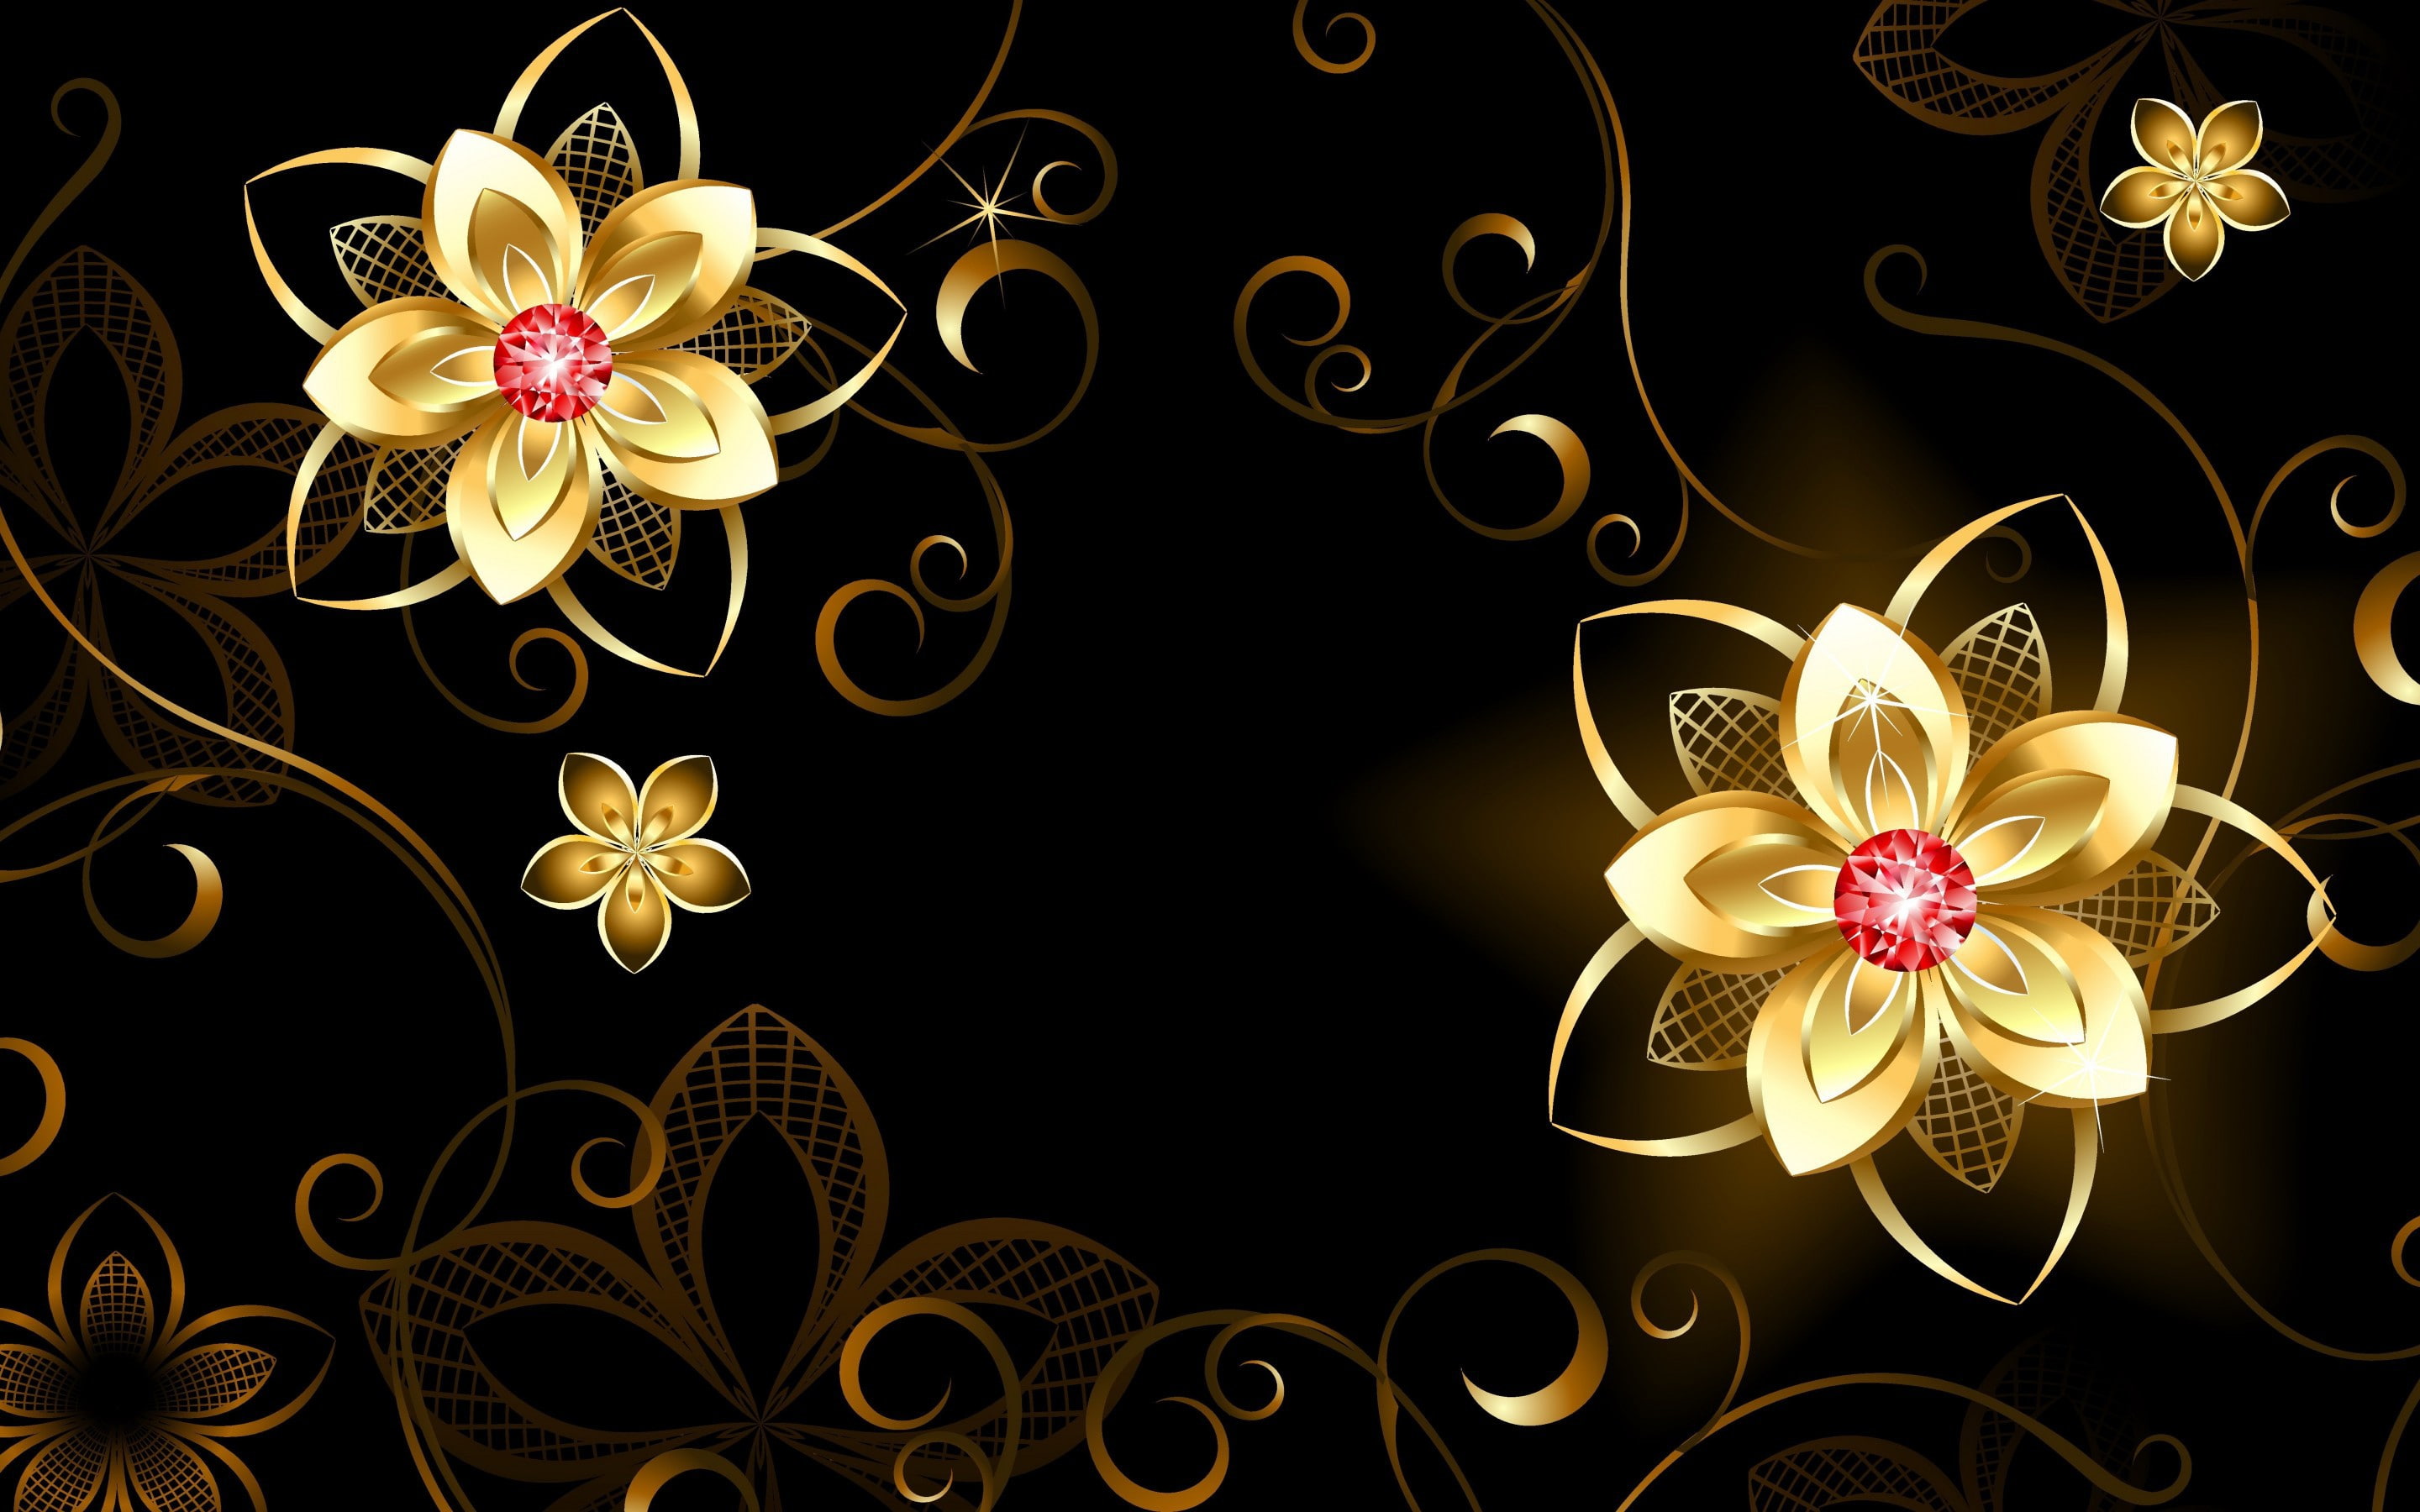 Gold flowers abstraction, black and gold flower printed picture